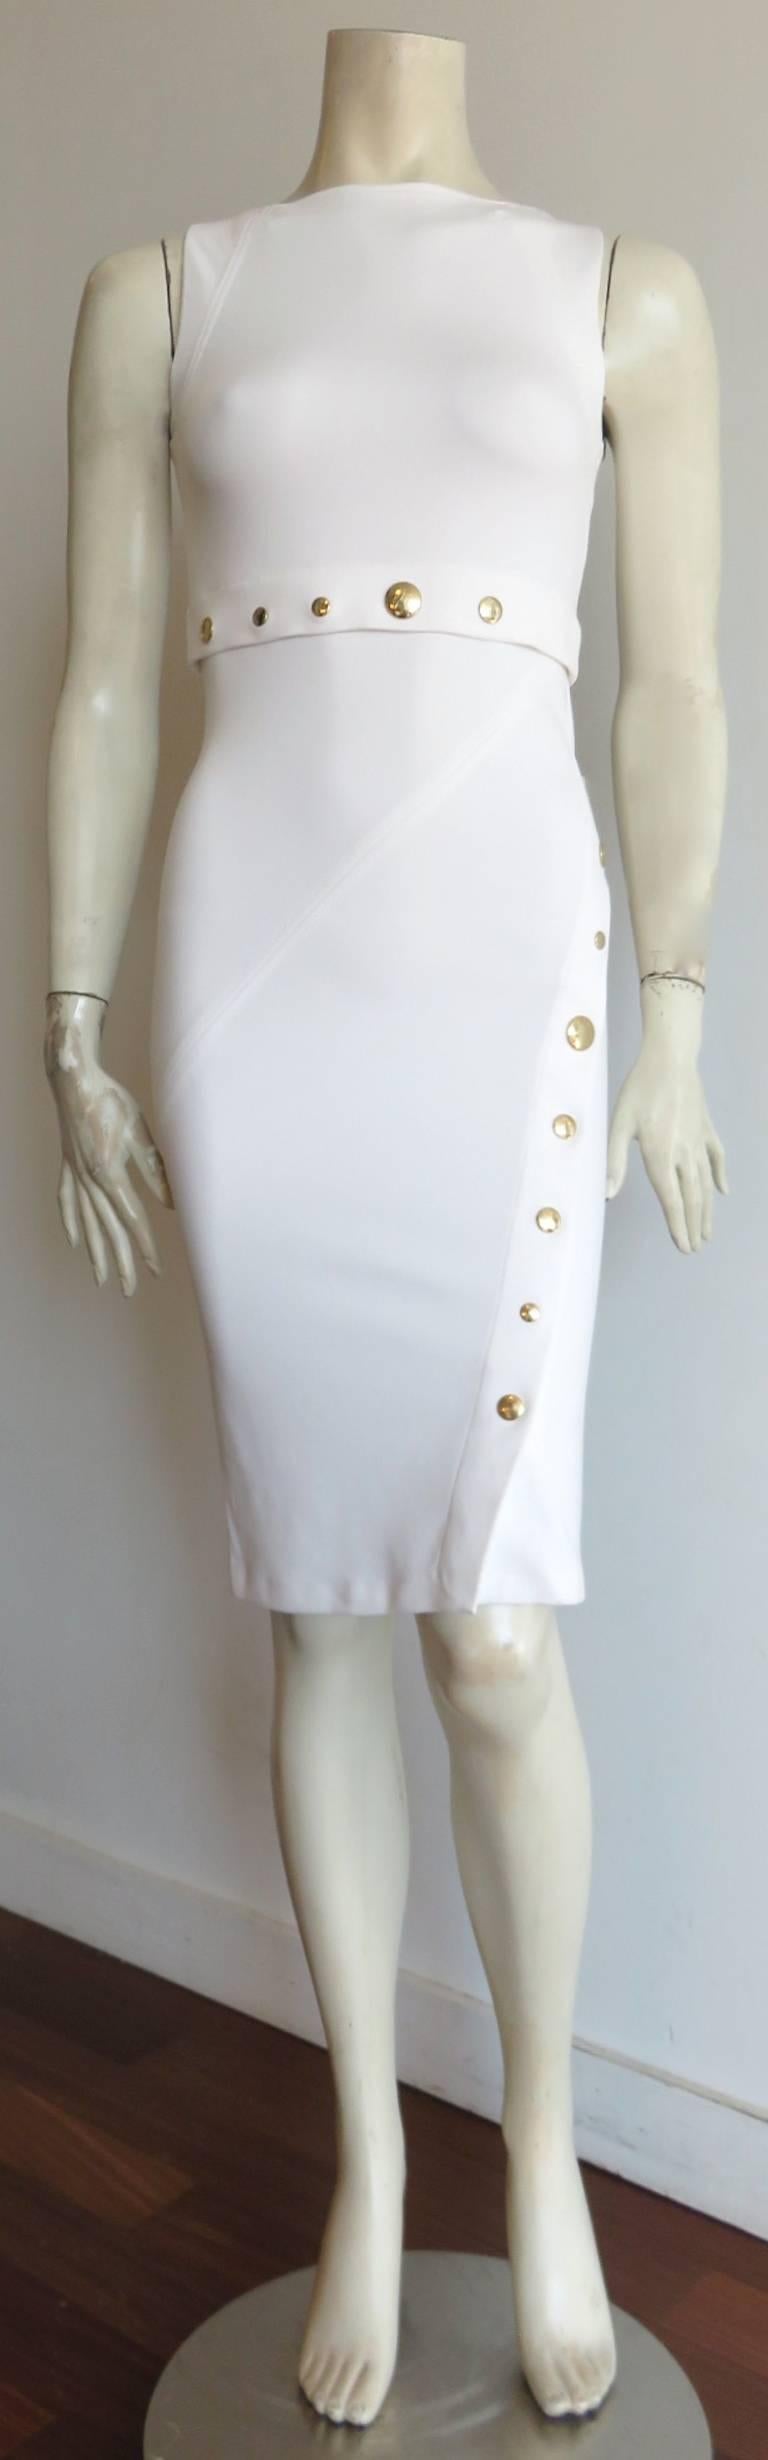 Recent, VERSACE COLLECTION, Medusa dome snap detail, white knit dress.

Optic white, knit jersey dress with gold-finished, Medusa engraved, metal snap heads at the waist, and side/front opening.

The snap heads at the side/front opening open,